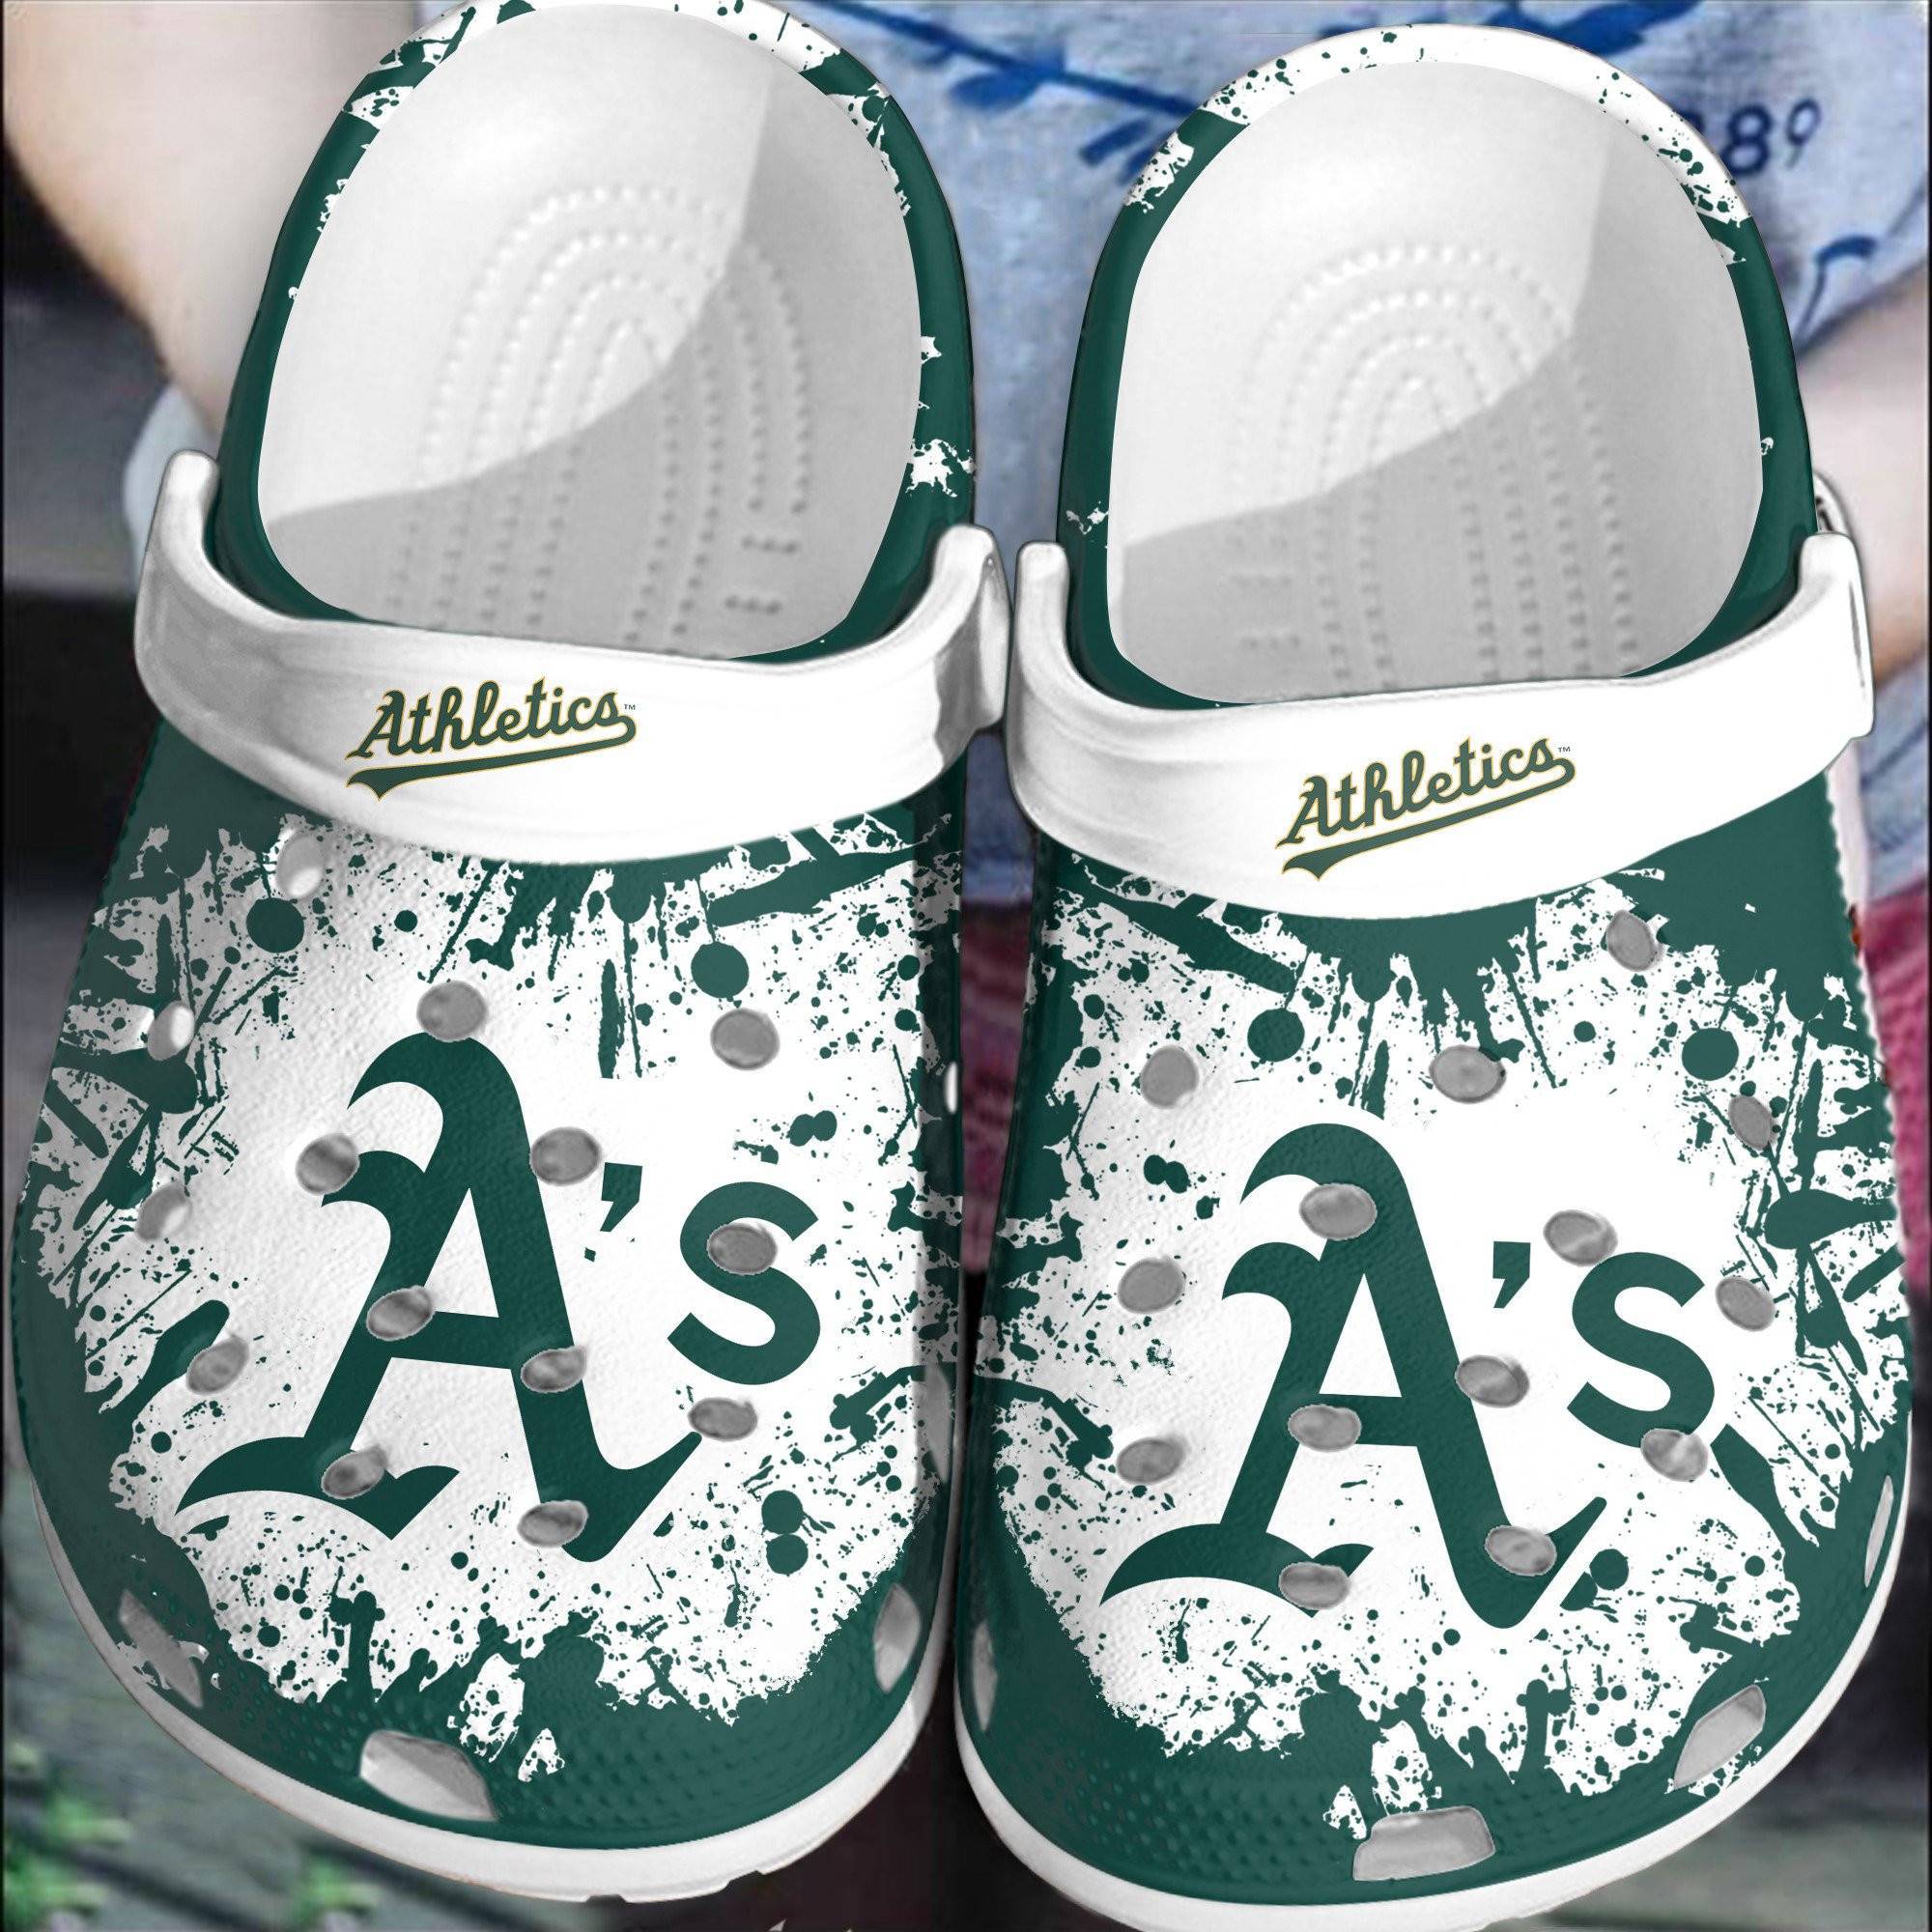 Hot Mlb Team Oakland Athletics Crocss Clog Shoesshoes Trusted Shopping Online In The World